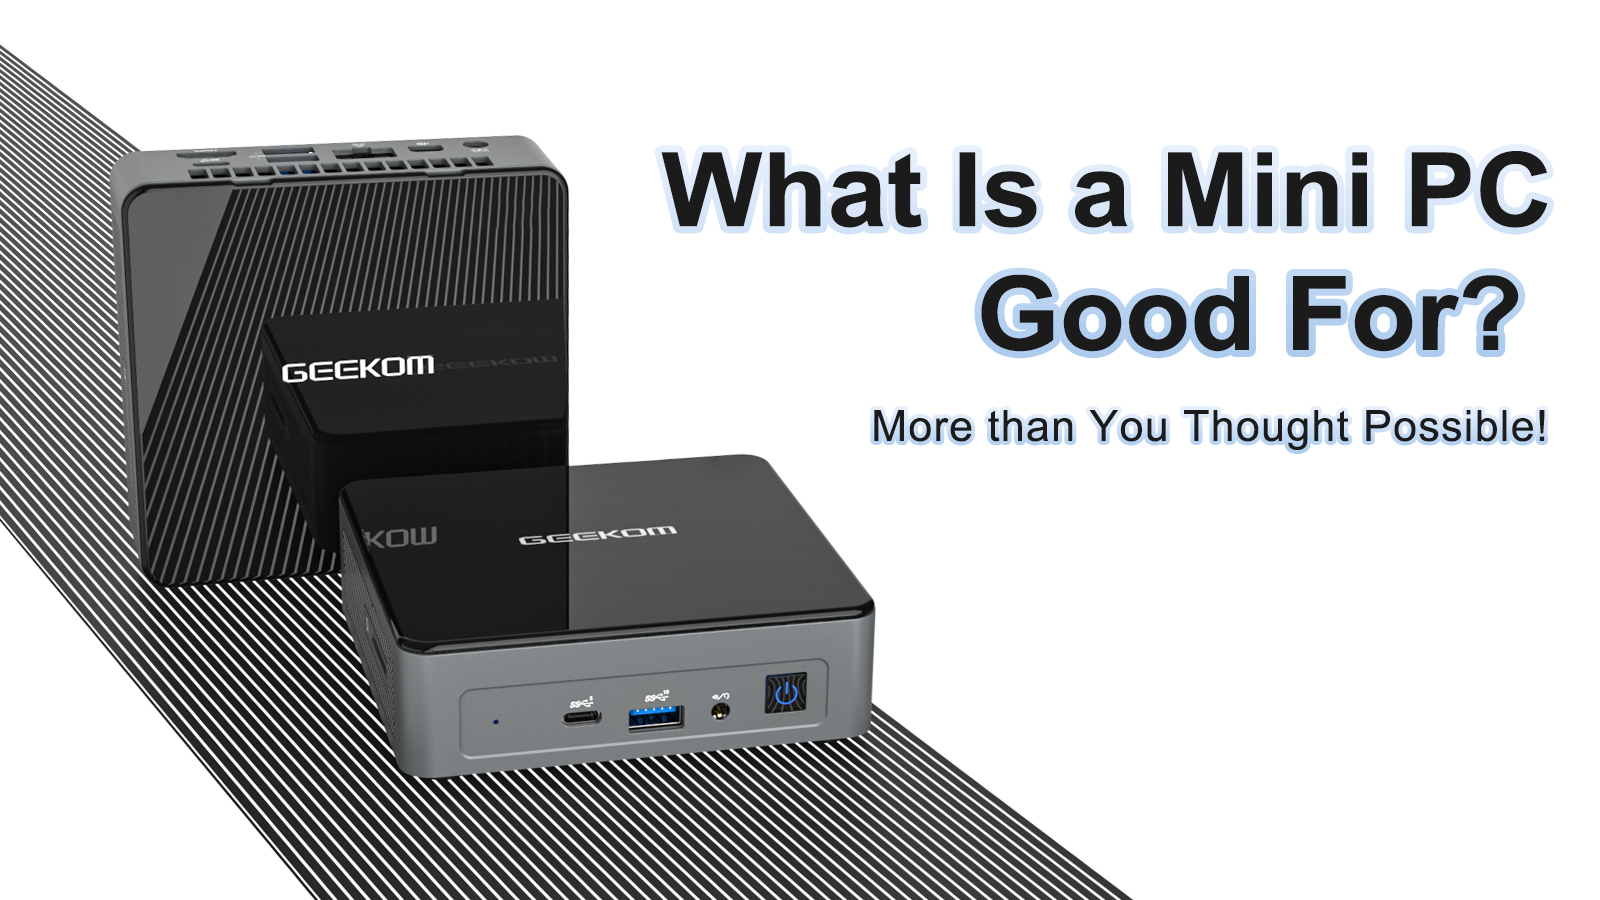 What Is Mini PC Used For? More than You Thought Possible! - GEEKOM